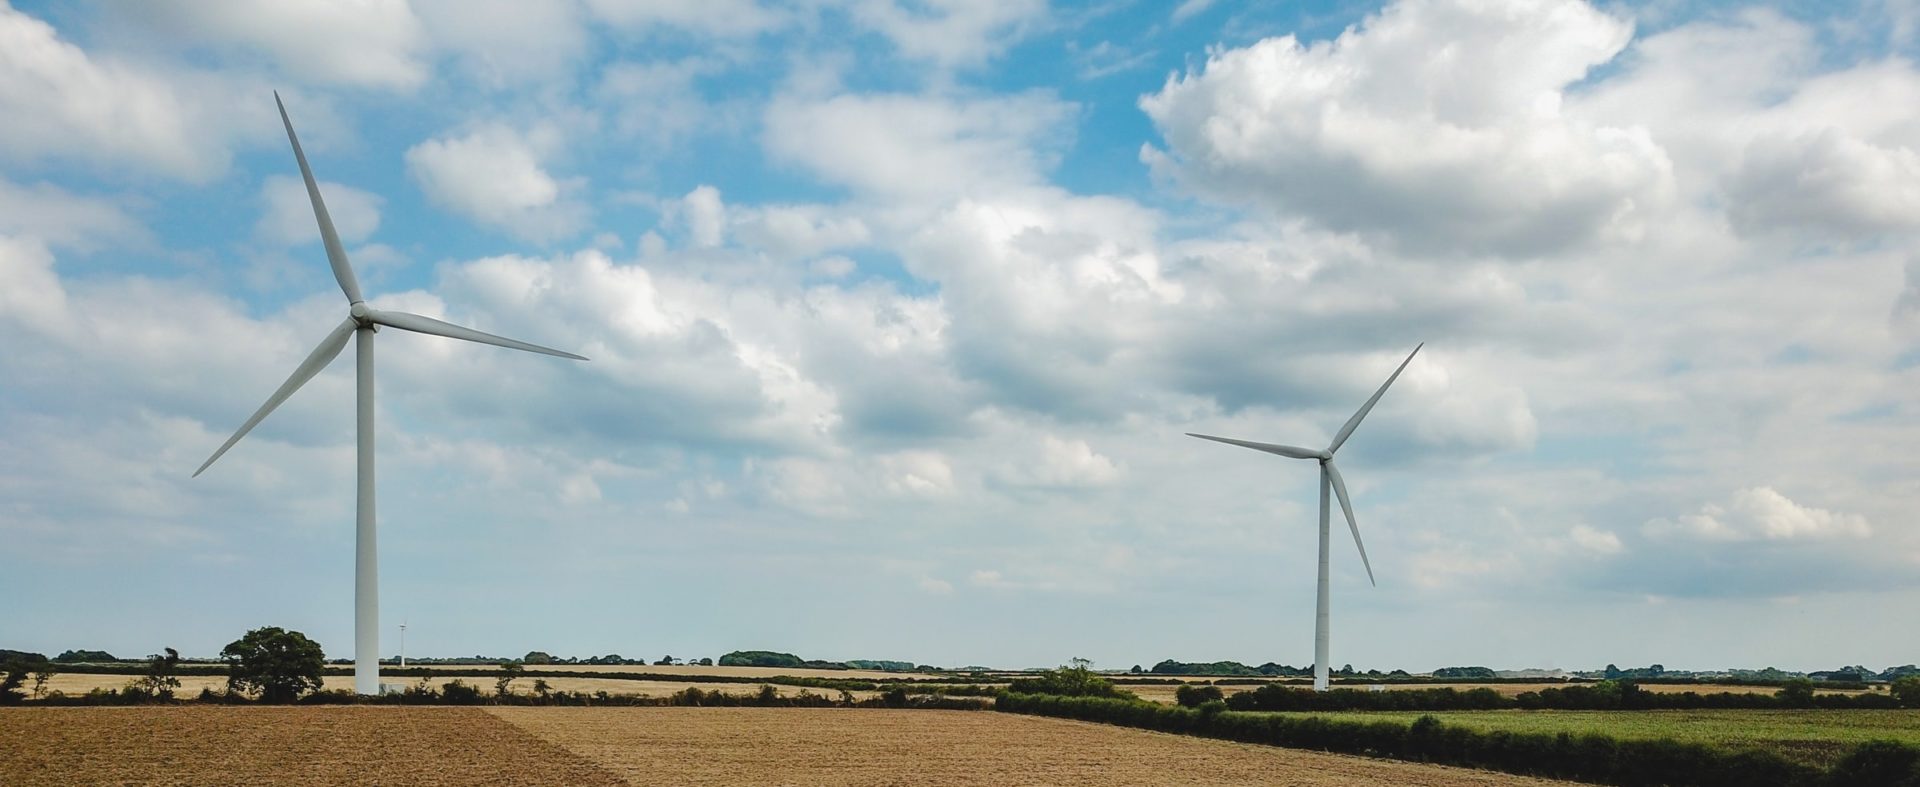 Farm being ploughed with wind turbines in background